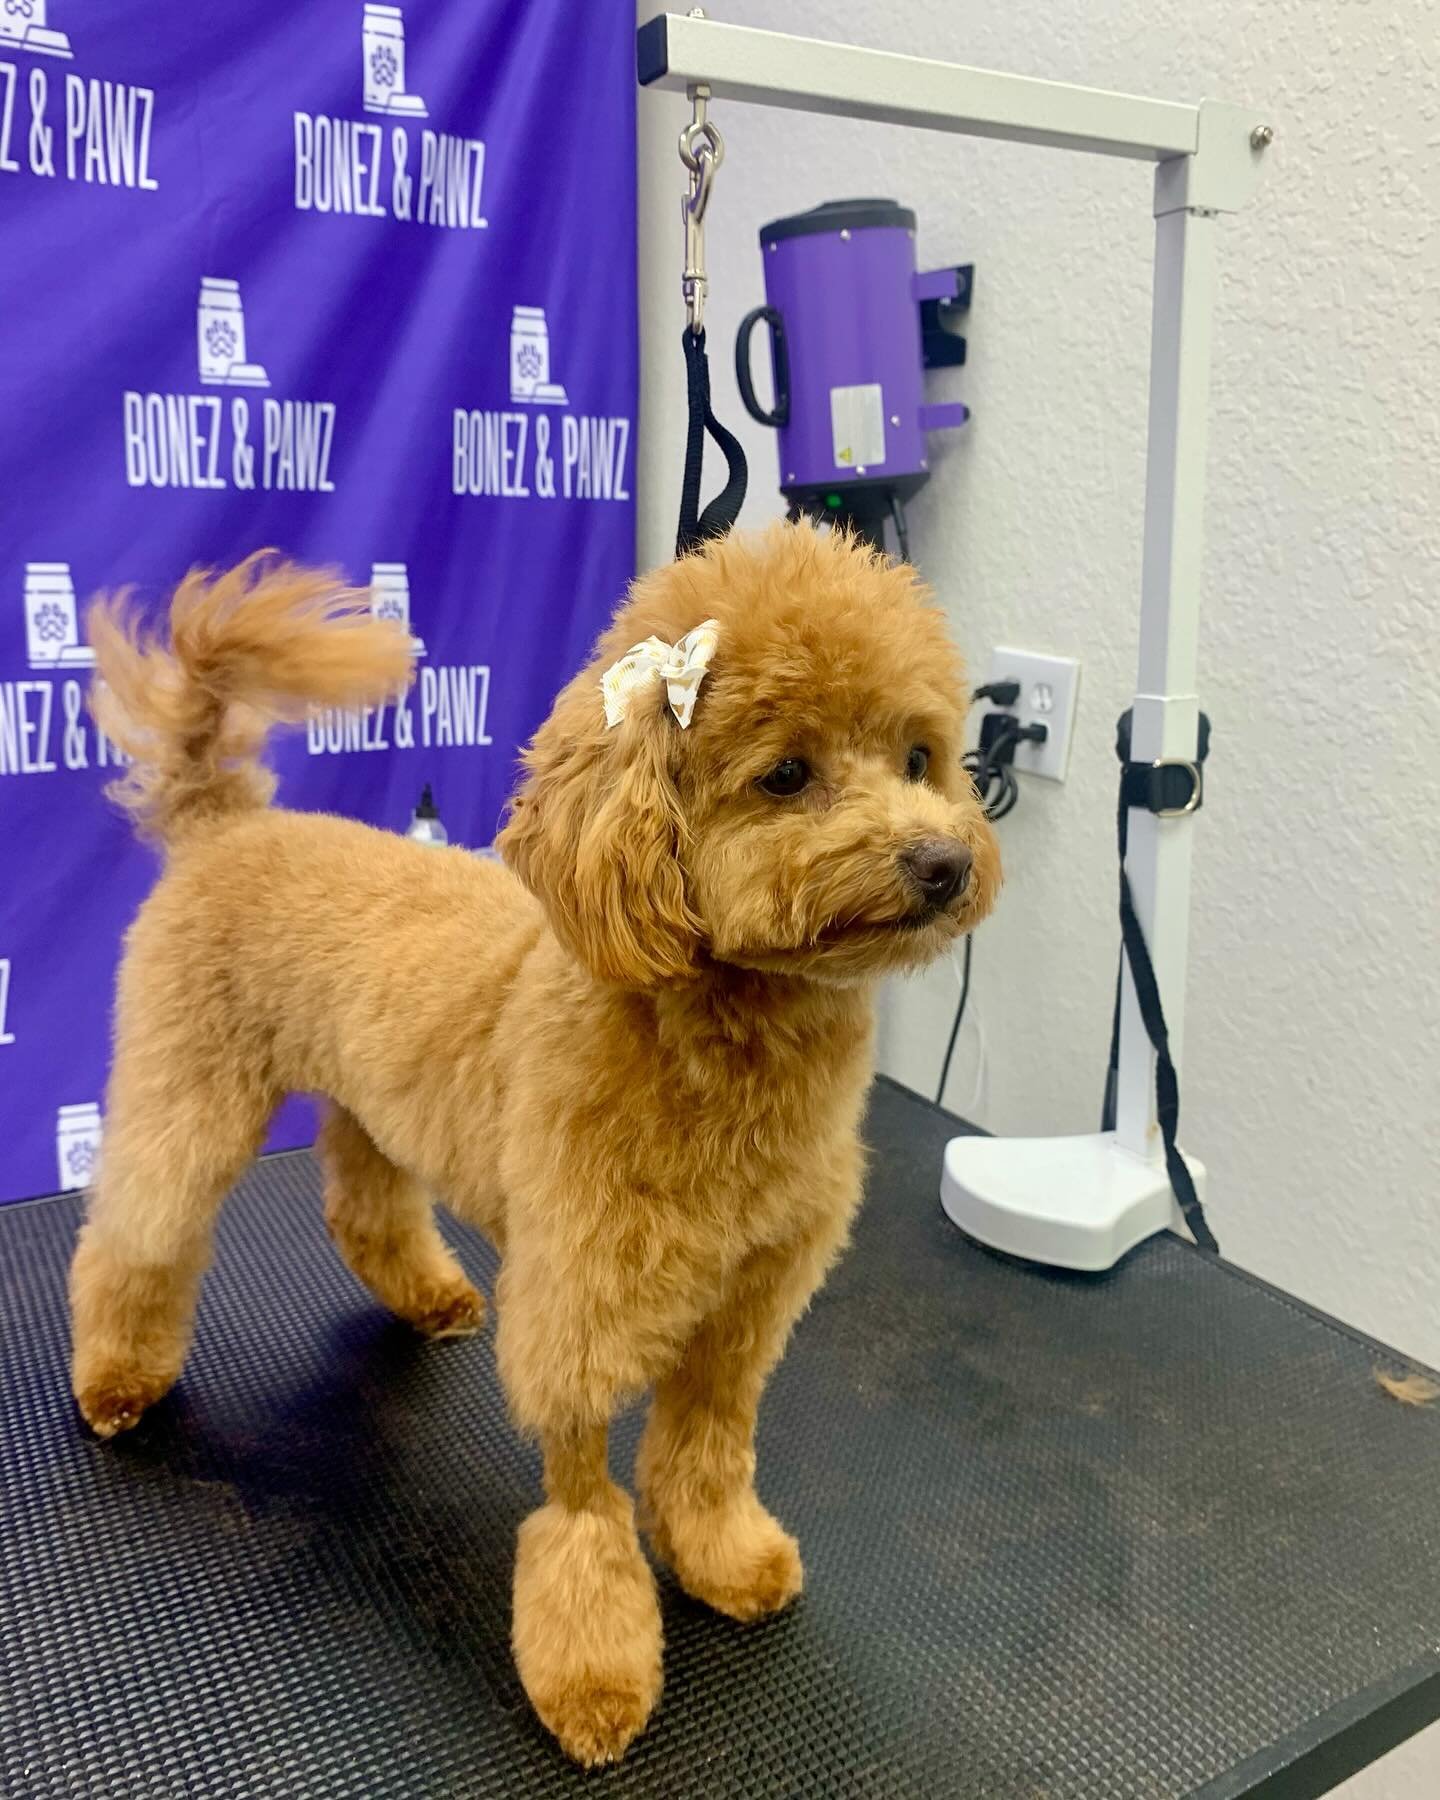 ☎️813-388-5340 call now to book your full service bath or Grooming Appointment #bonezandpawz #dog #cat #grooming #doggrooming #catgrooming #newtampa #supportsmallbusiness #fullservice #nailtrim